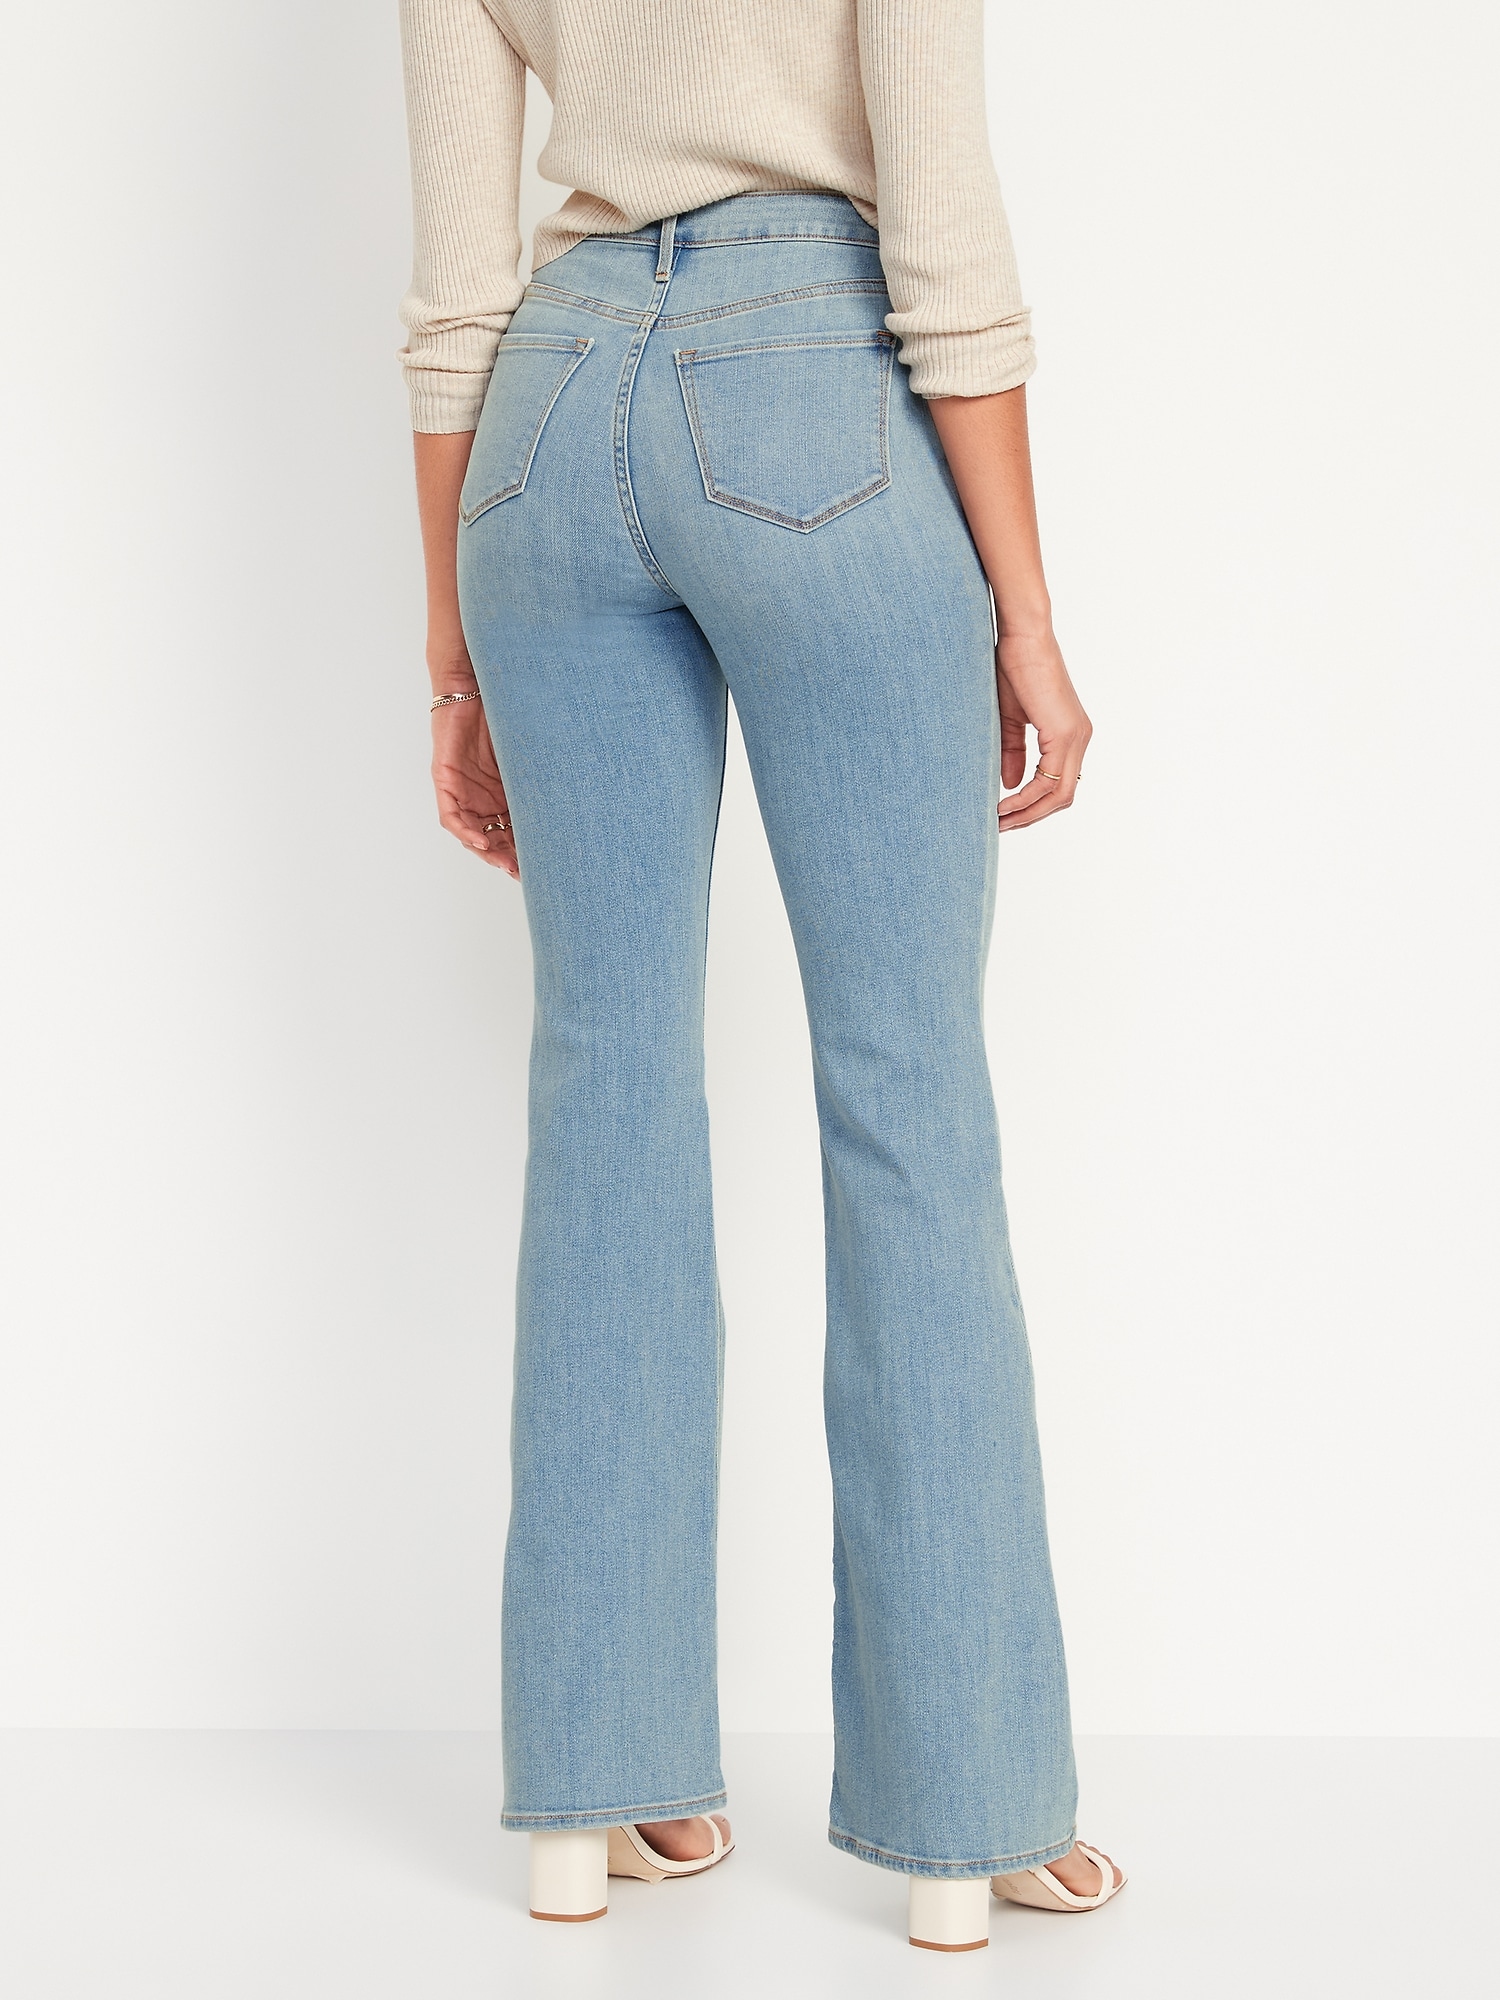 Old Navy The Flirt Trouser Jeans Flare Stretch  Flare jeans Trouser jeans  Flares